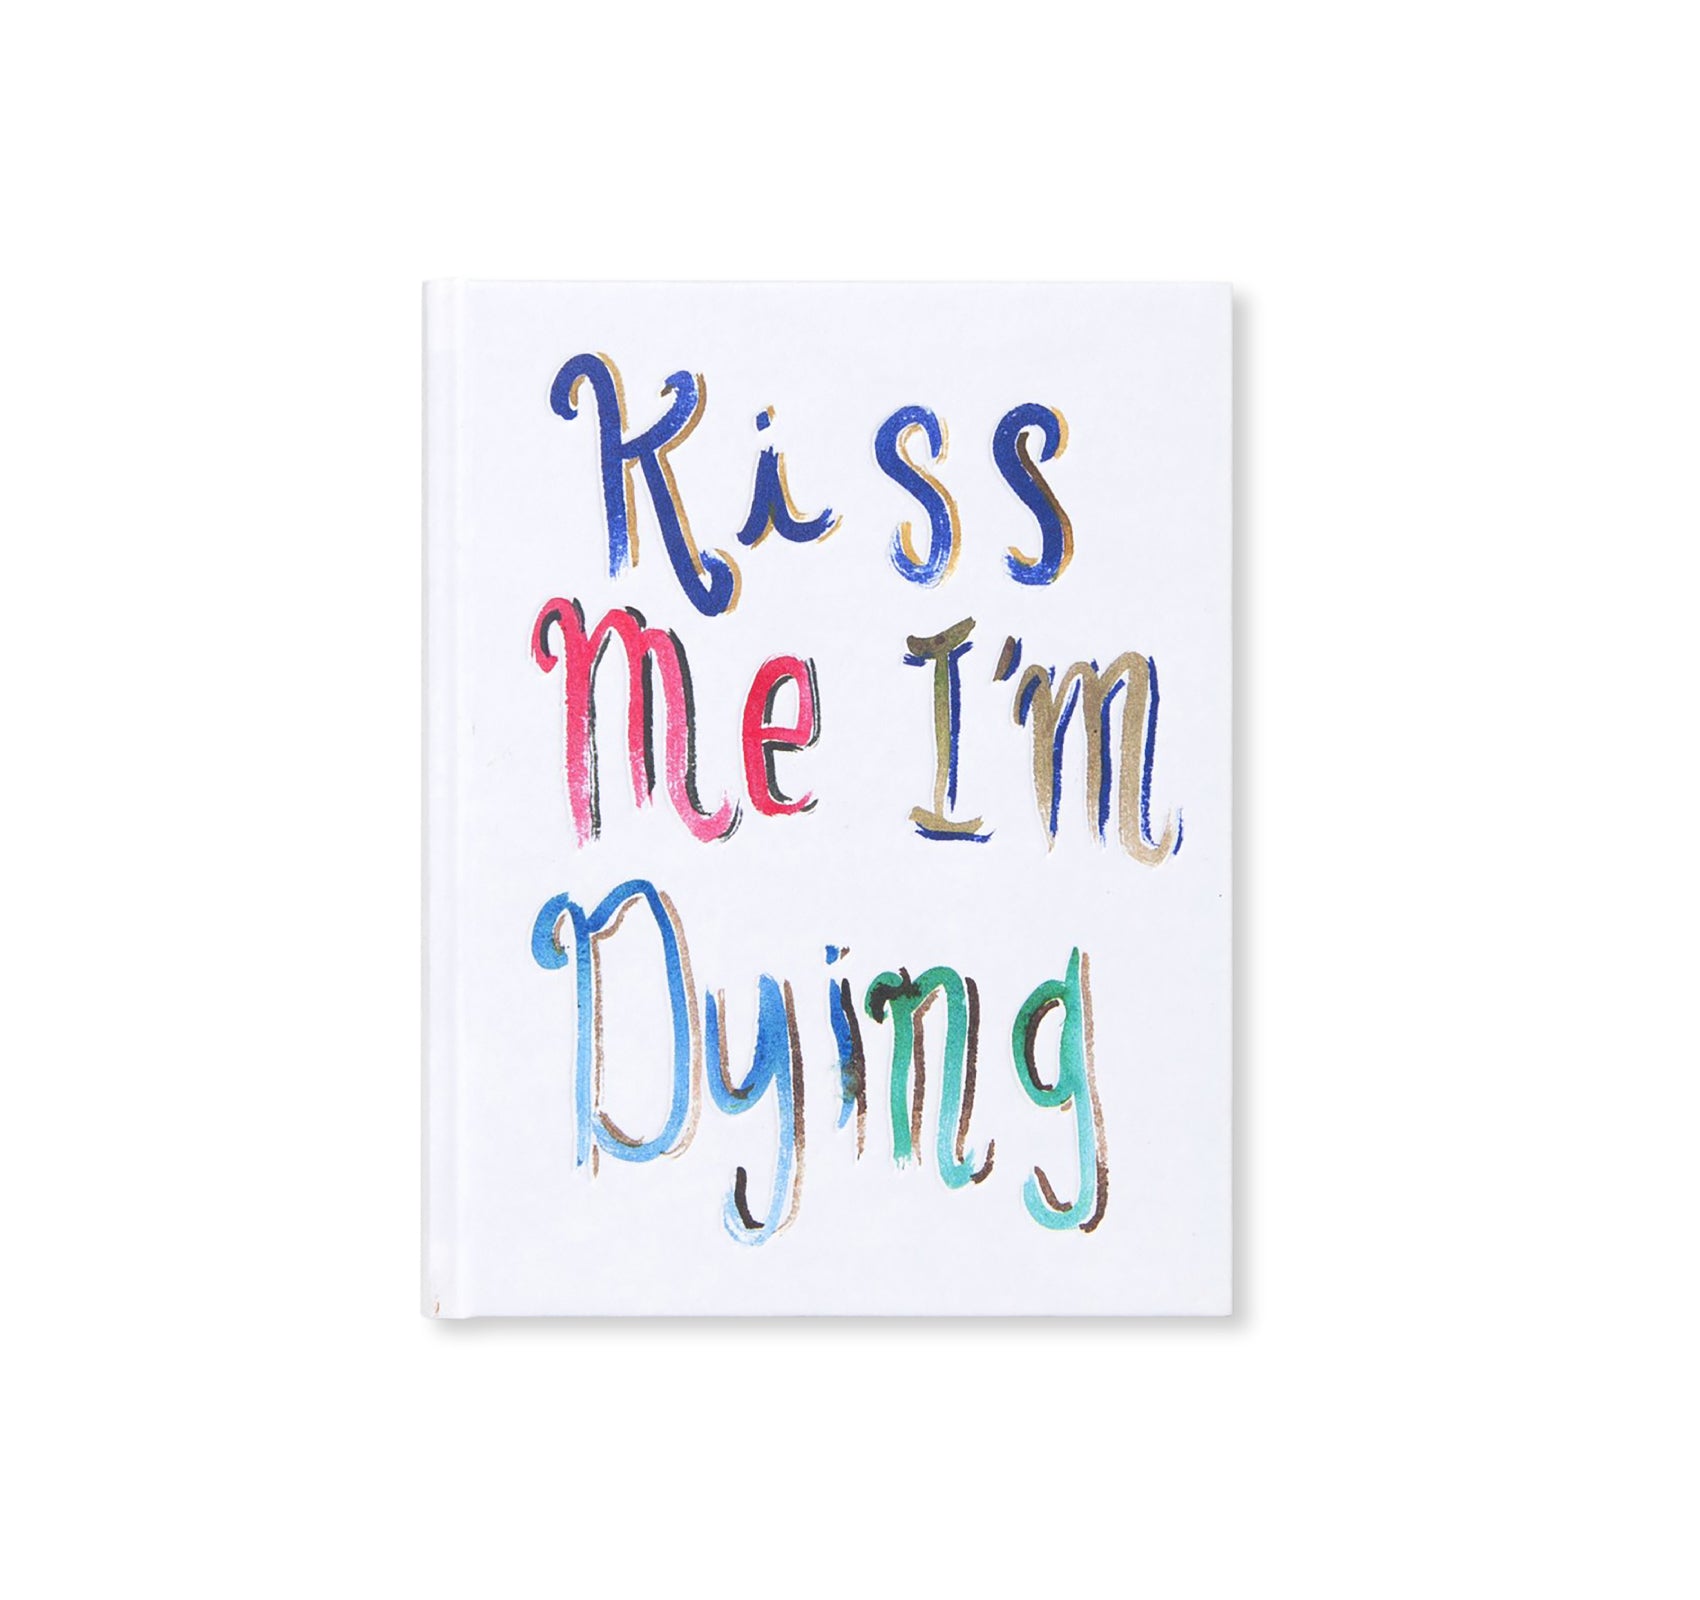 KISS ME I'M DYING by Brad Phillips